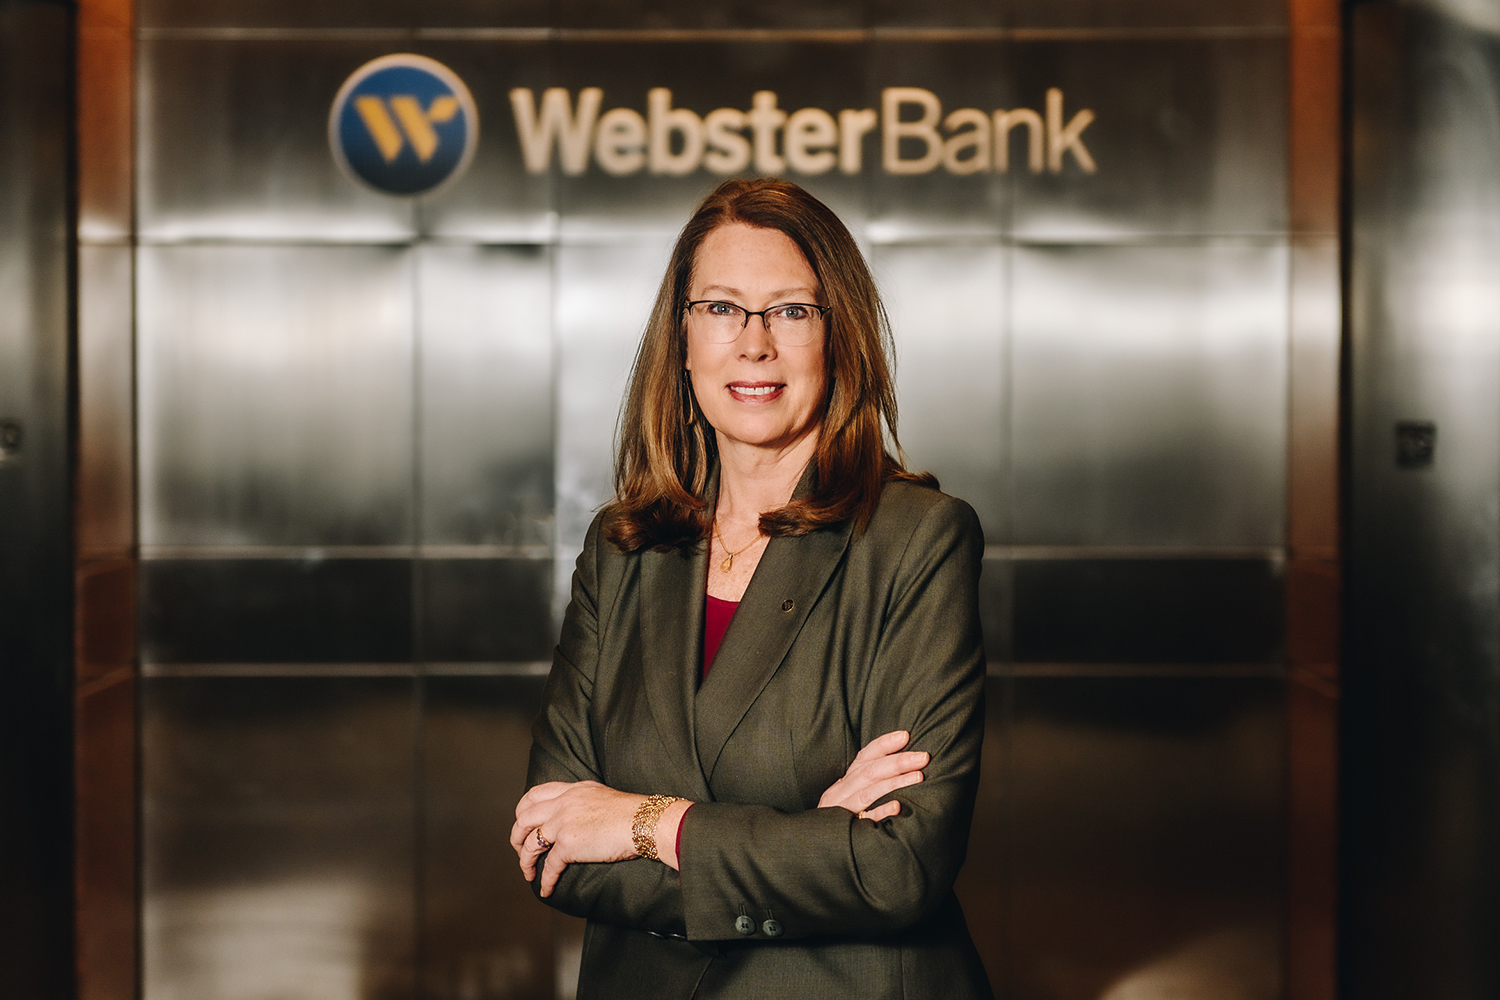 Kathy Luria '91, SVP, community affairs and director of philanthropy at Webster Bank. (Nathan Oldham / UConn School of Business)